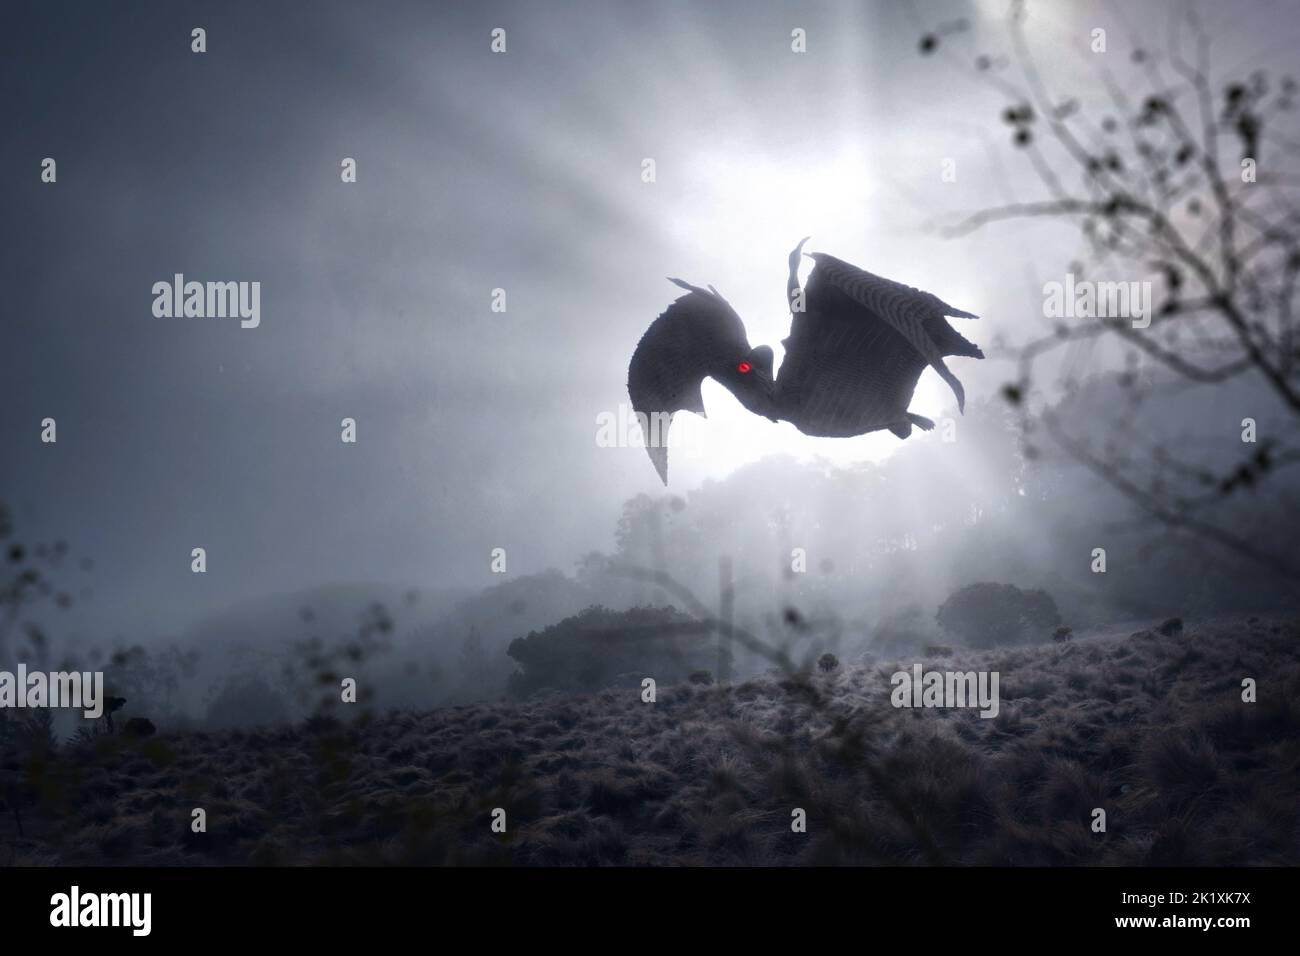 Bats flying in the sky with a night scene background. Halloween concept Stock Photo